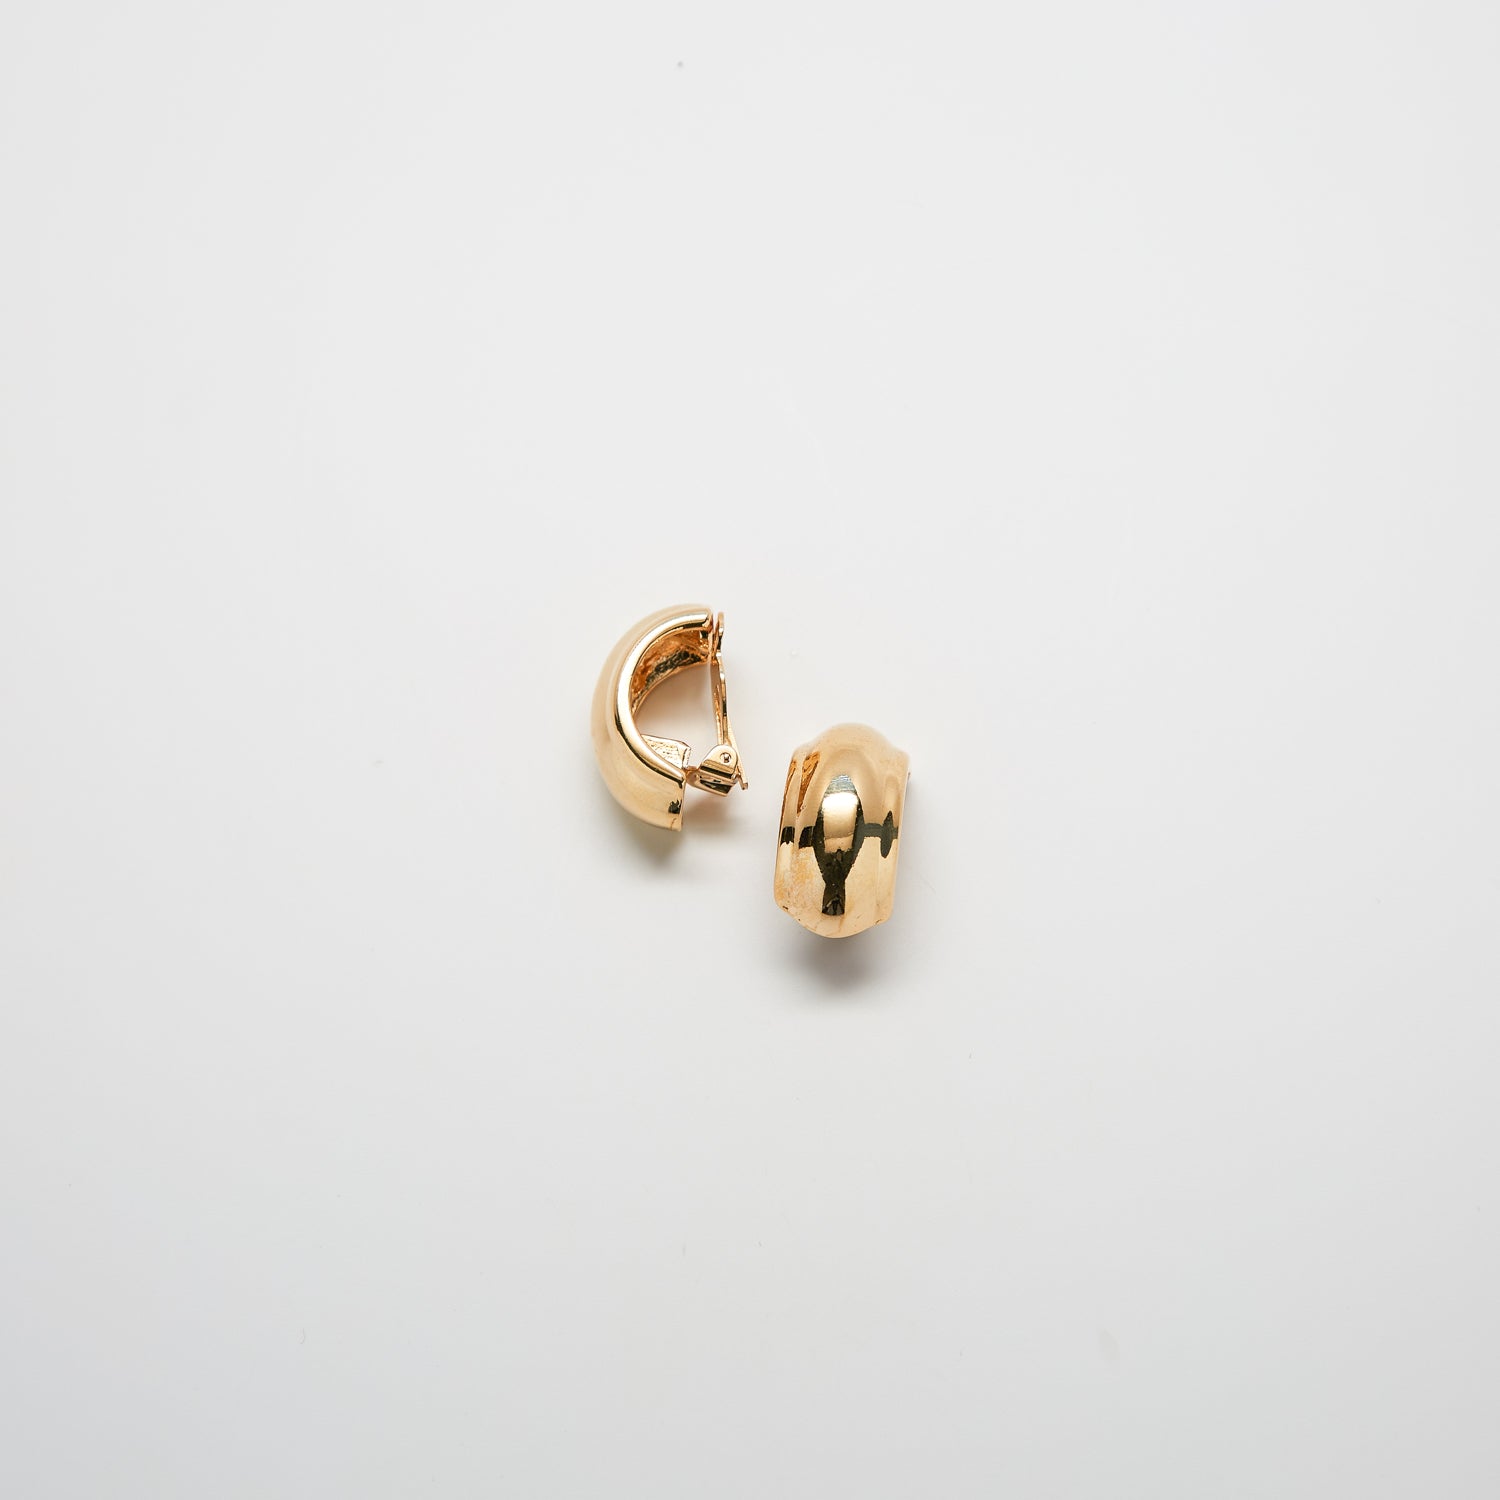 Vintage Gold Dome Earrings